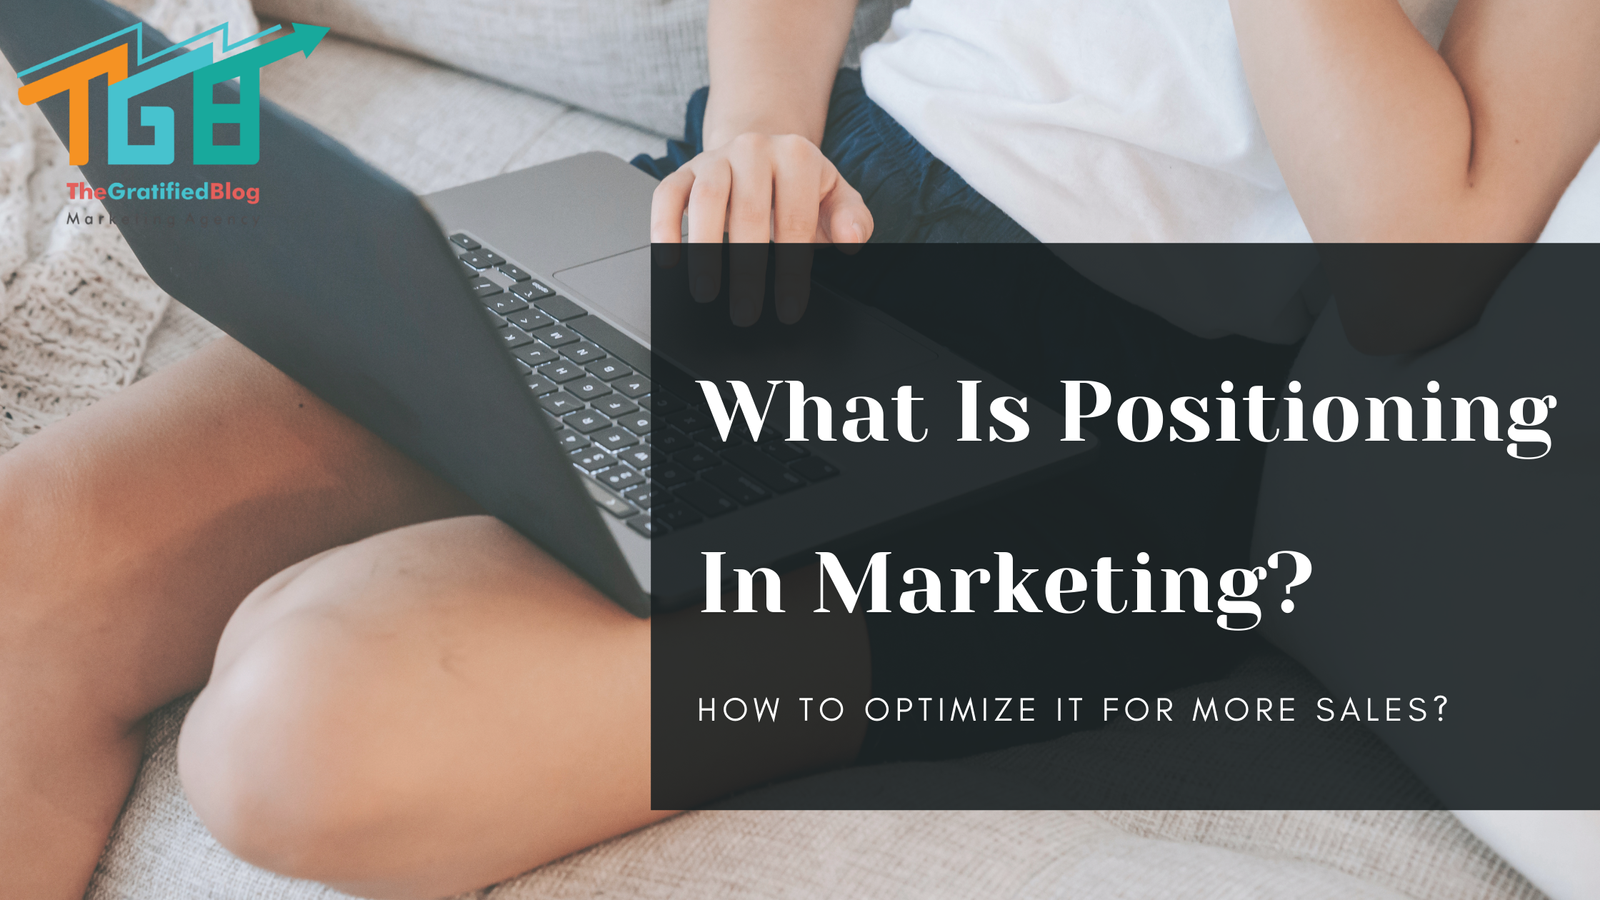 What Is Positioning In Marketing?